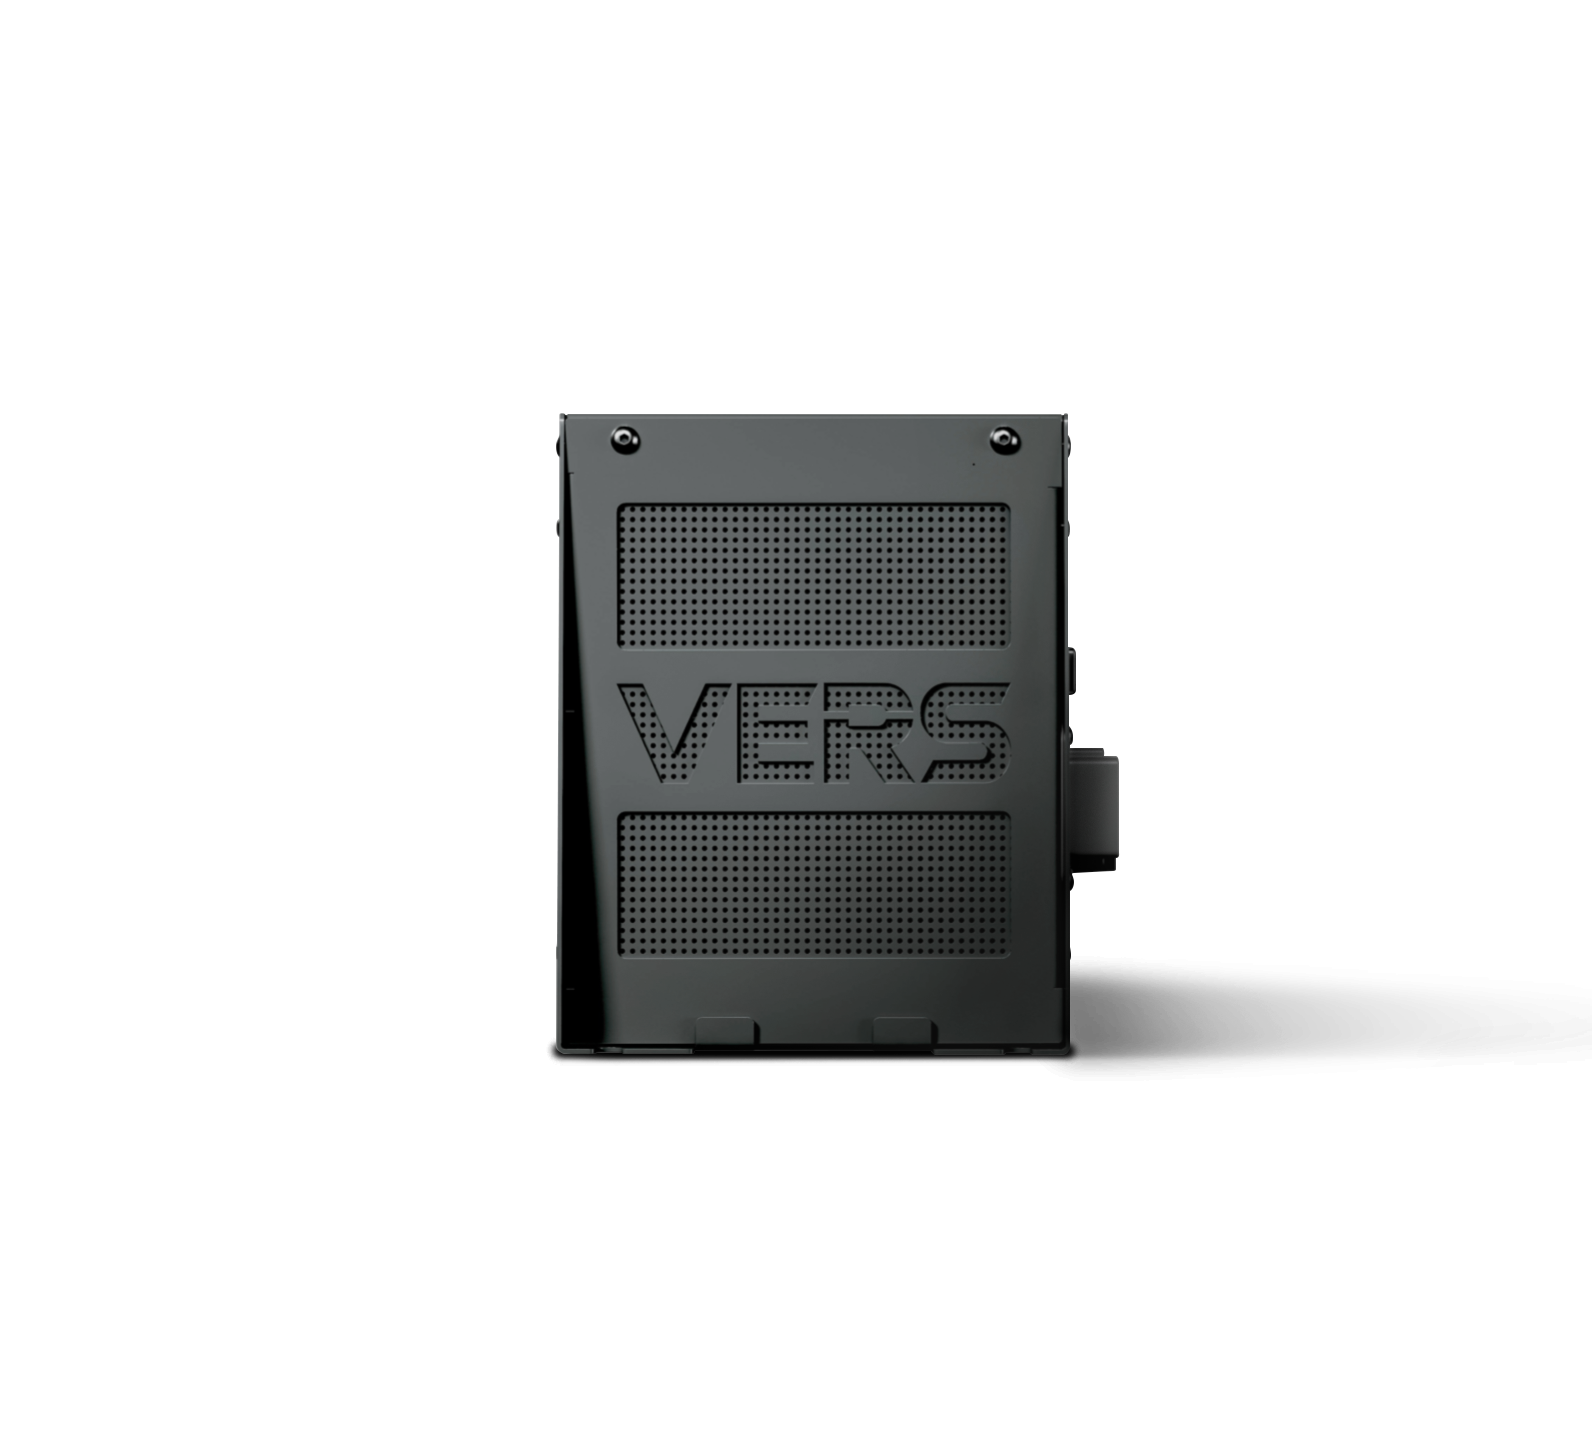 VERS energy recuperation system